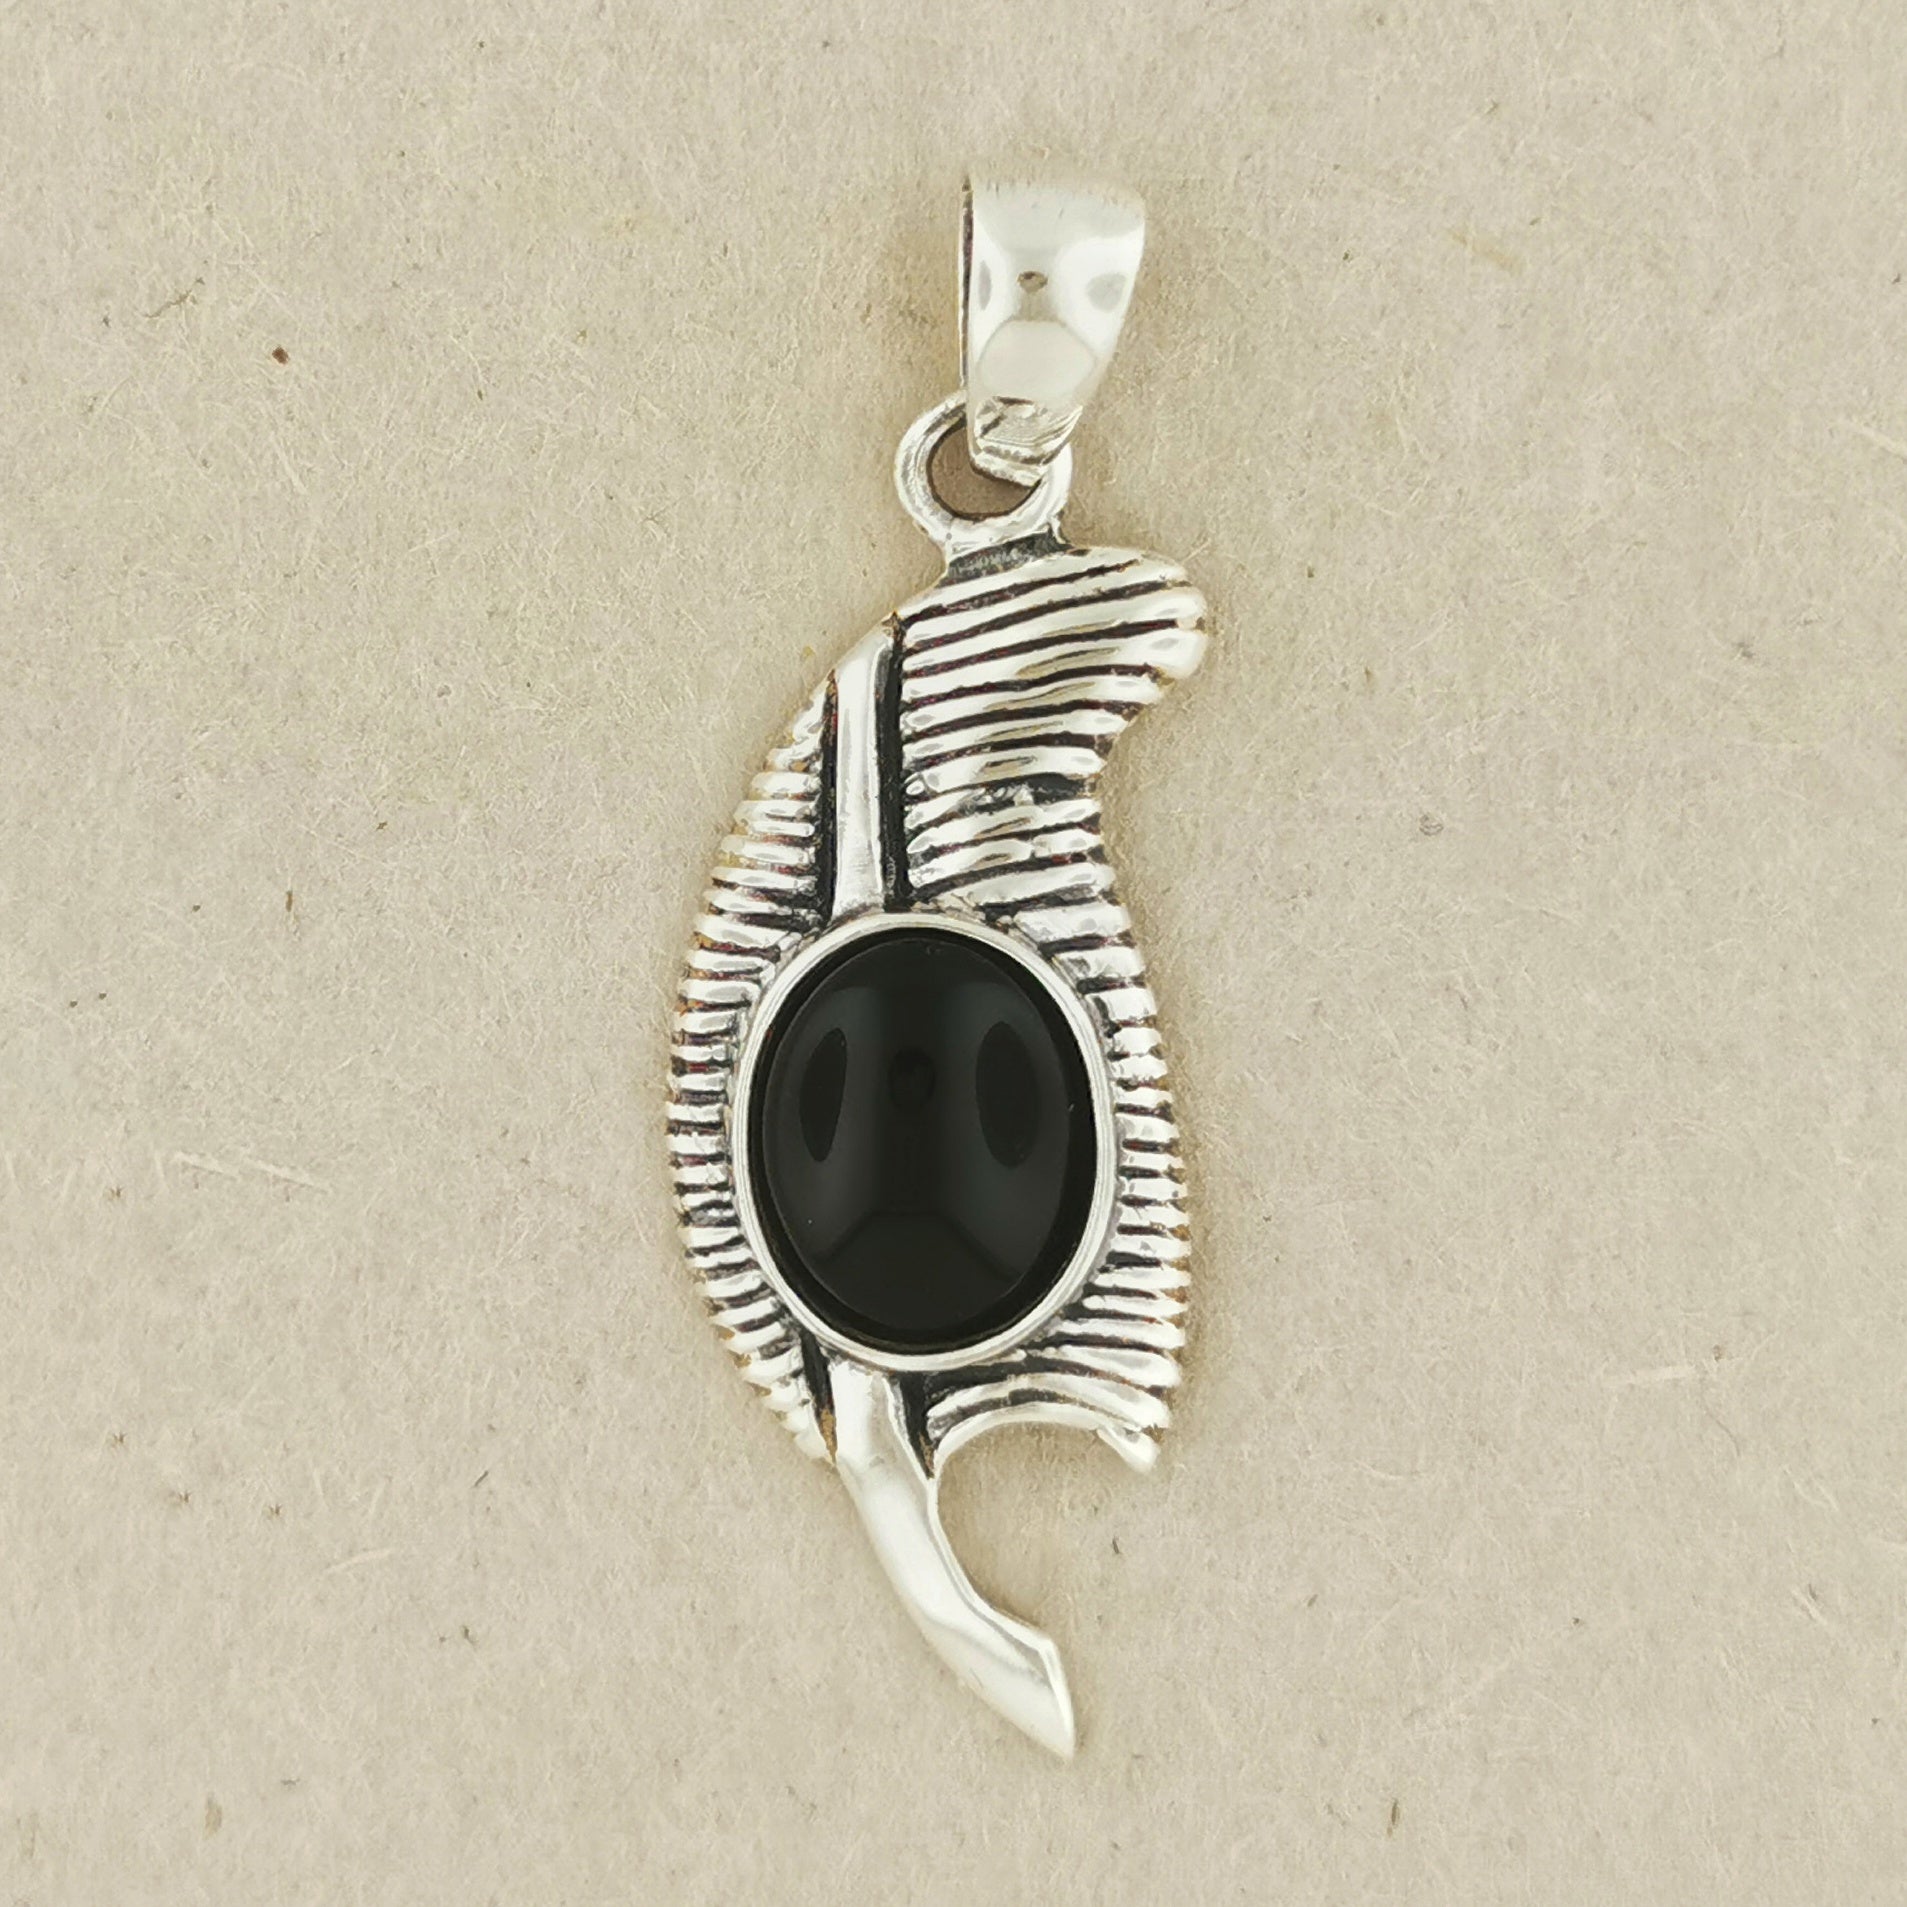 Feather of Ma'at Pendant in Sterling Silver with Onyx, Egyptian Feather Pendant, Egyptian Goddess Pendant, Goddess of Truth Pendant, Silver Egyptian Feather Pendant, Silver Ma’at Pendant, Egyptian Silver Pendant, Silver Gemstone Egyptian Feather Pendant